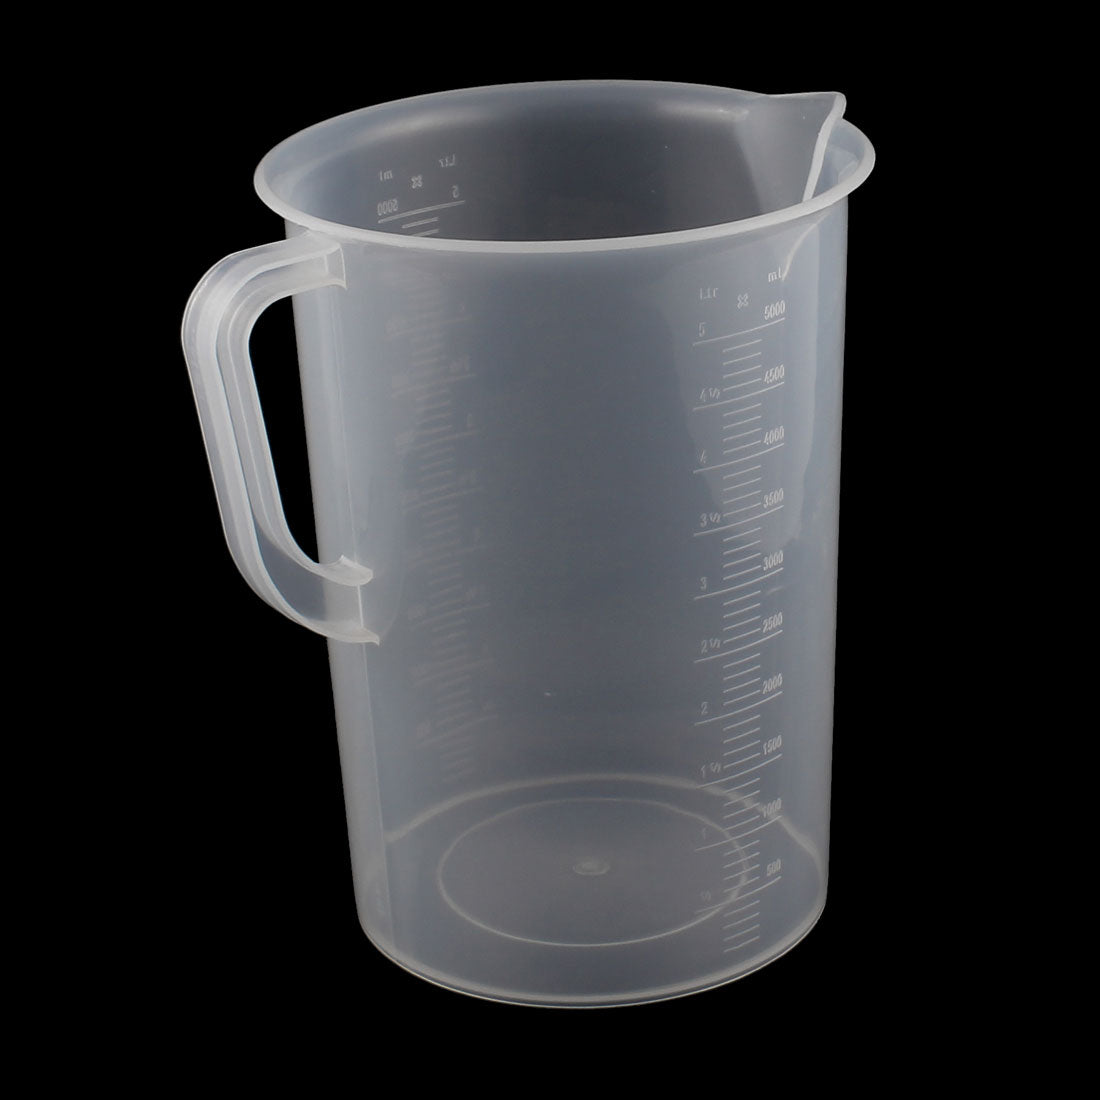 uxcell Uxcell Kitchen Labotary 5000mL Plastic Measuring Cup Jug Pour Spout Container